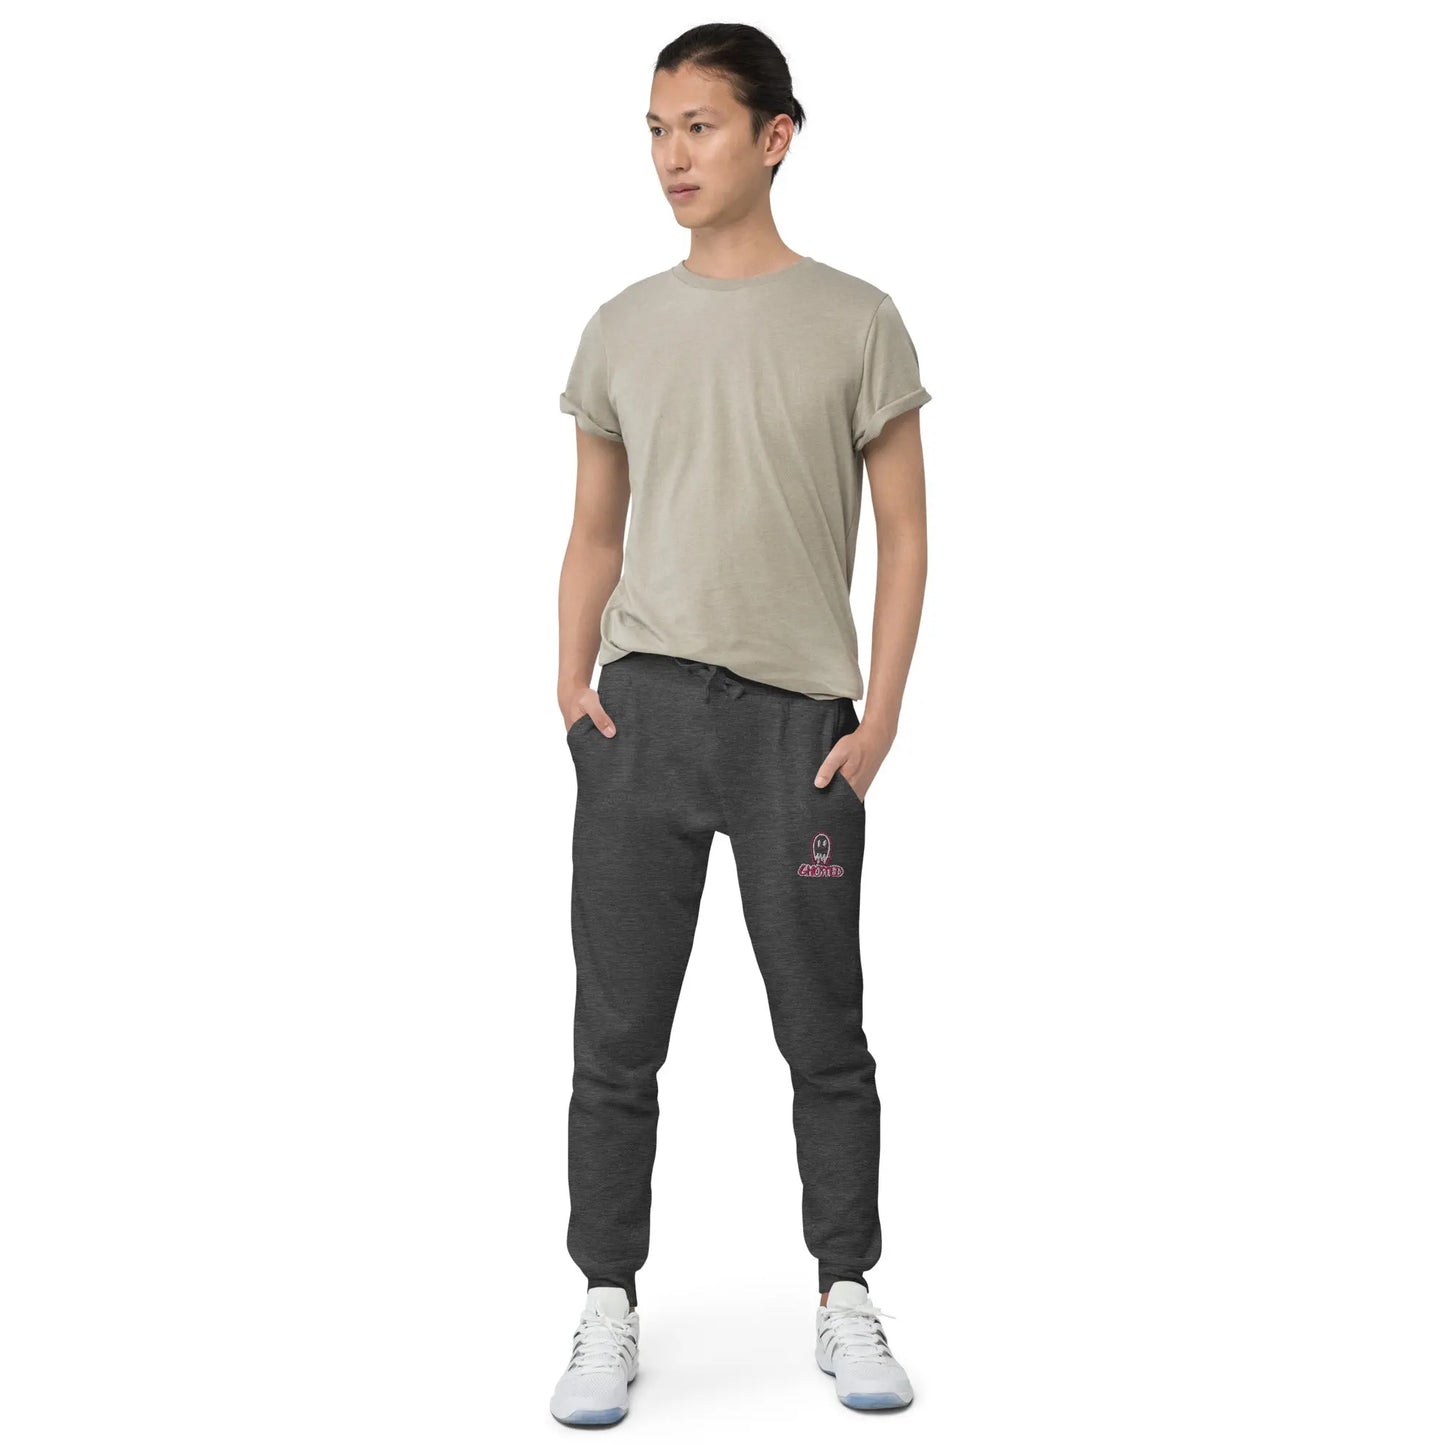 Ghosted Sweatpants - Image #6